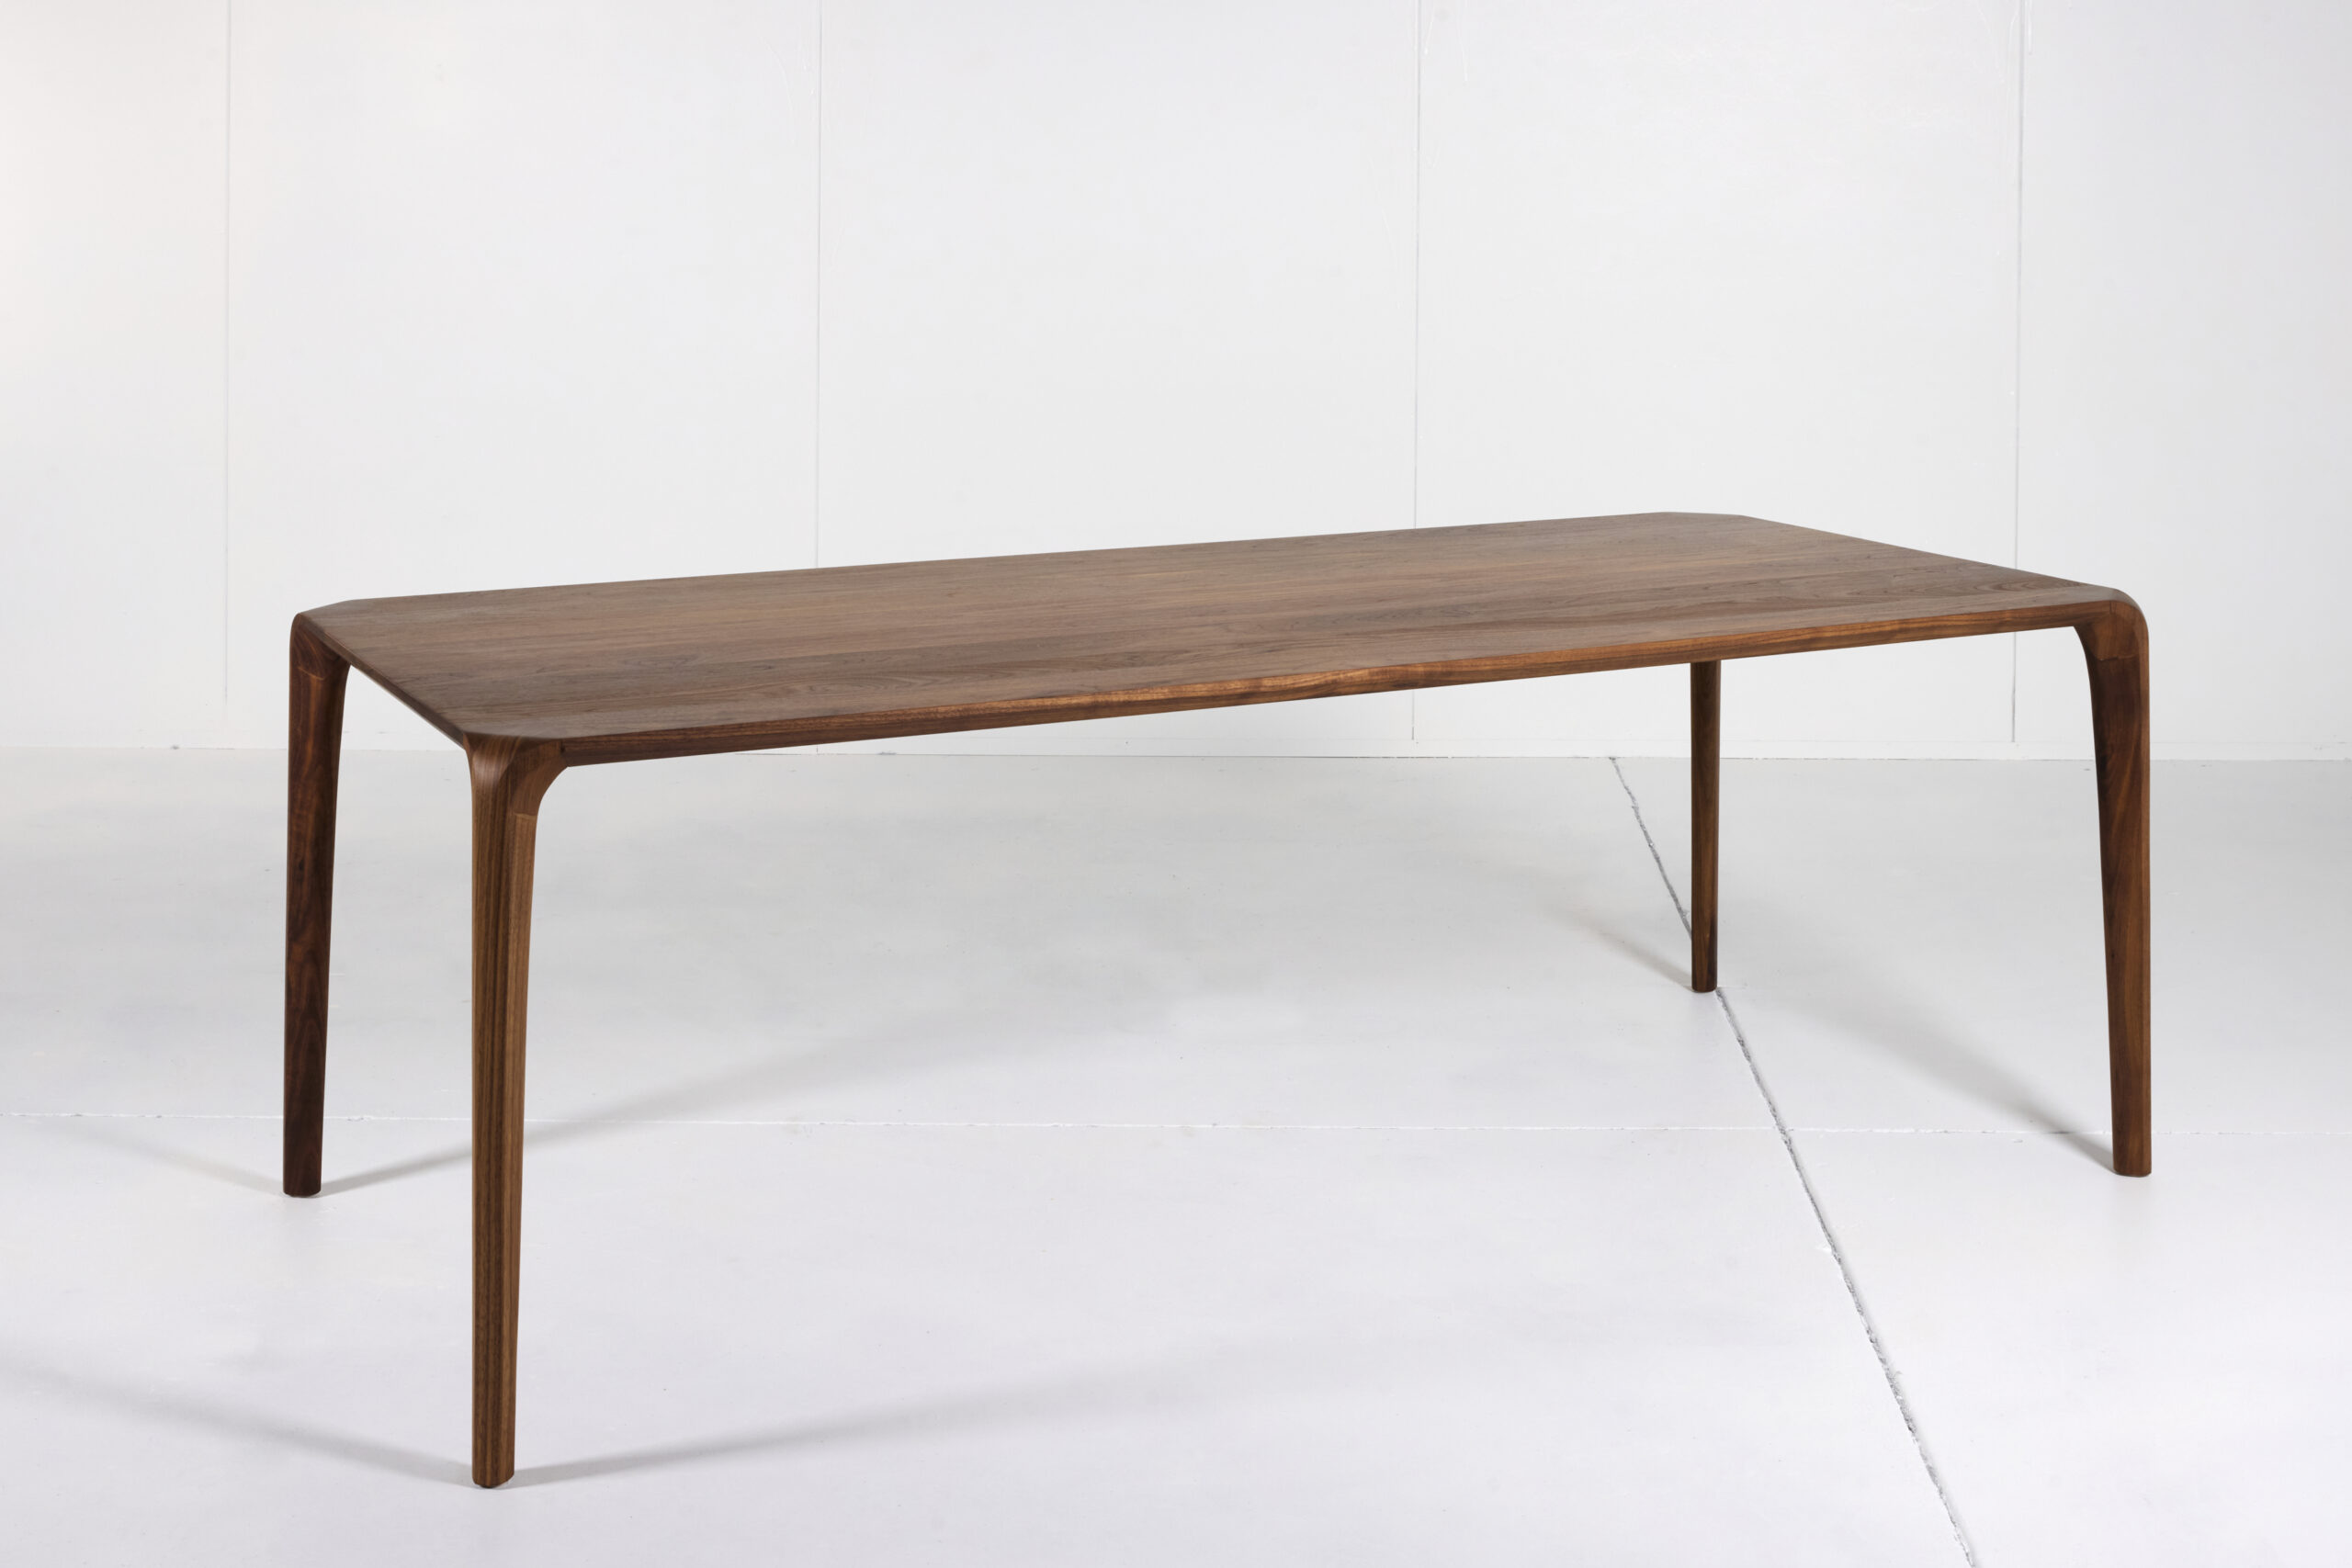 Image of Sara Dining Table by Arranmore Furniture, showcasing its sleek design and stable base, perfect for any dining room.